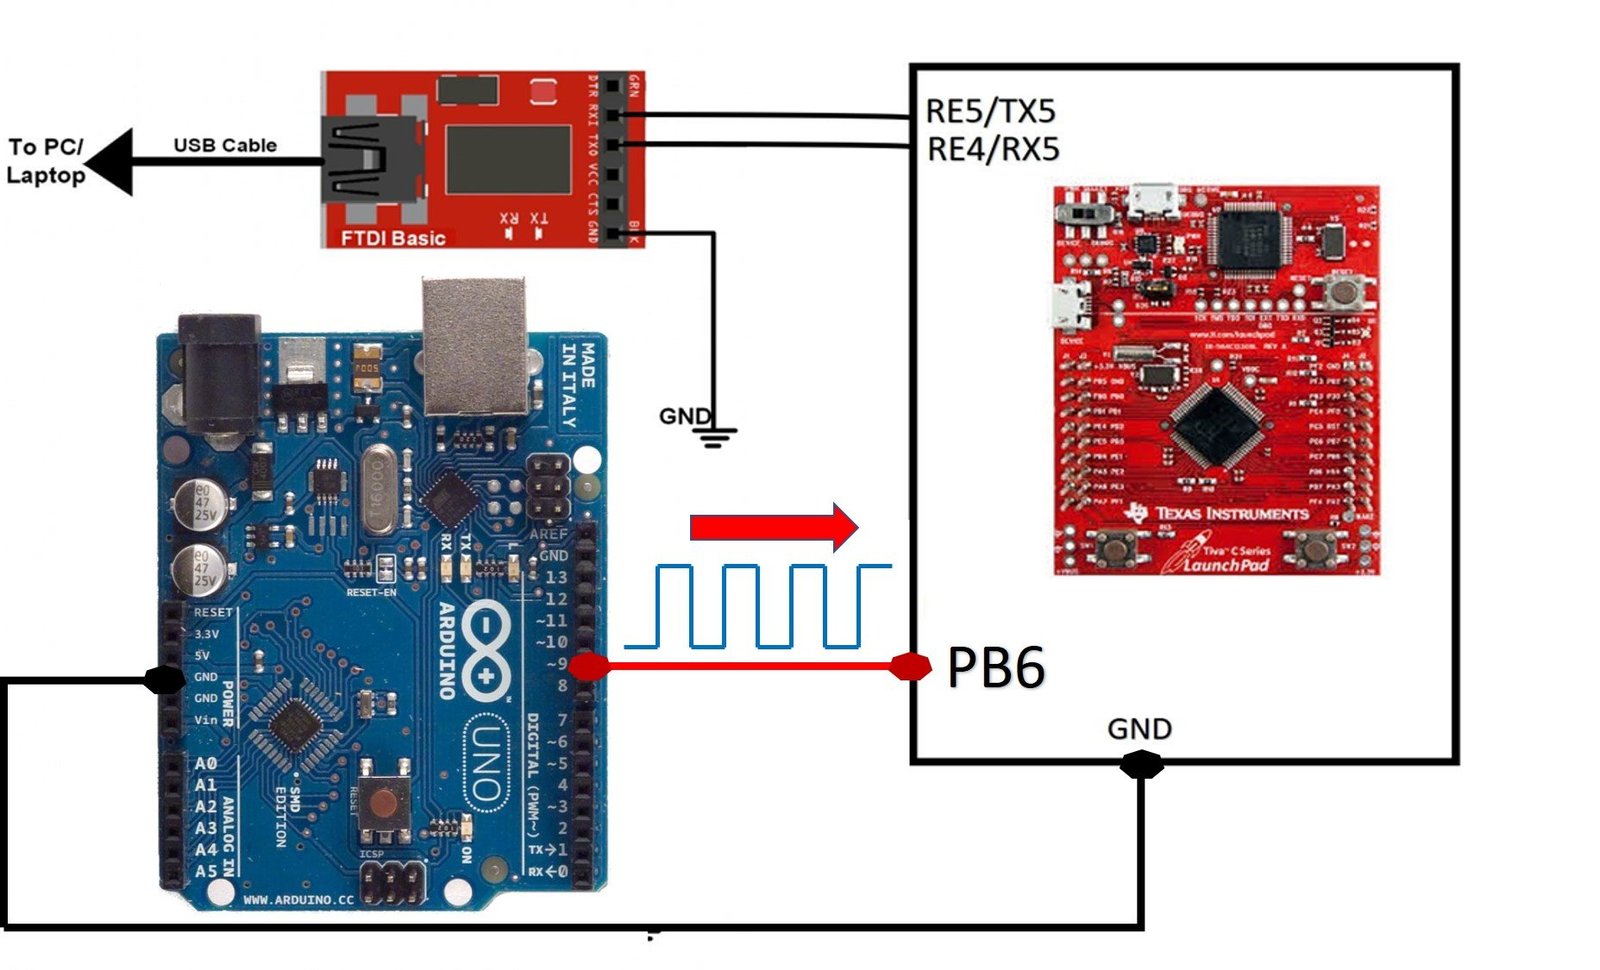 pulse duration and pulse width measurement using TM4C123 Timer in input edge capture mode